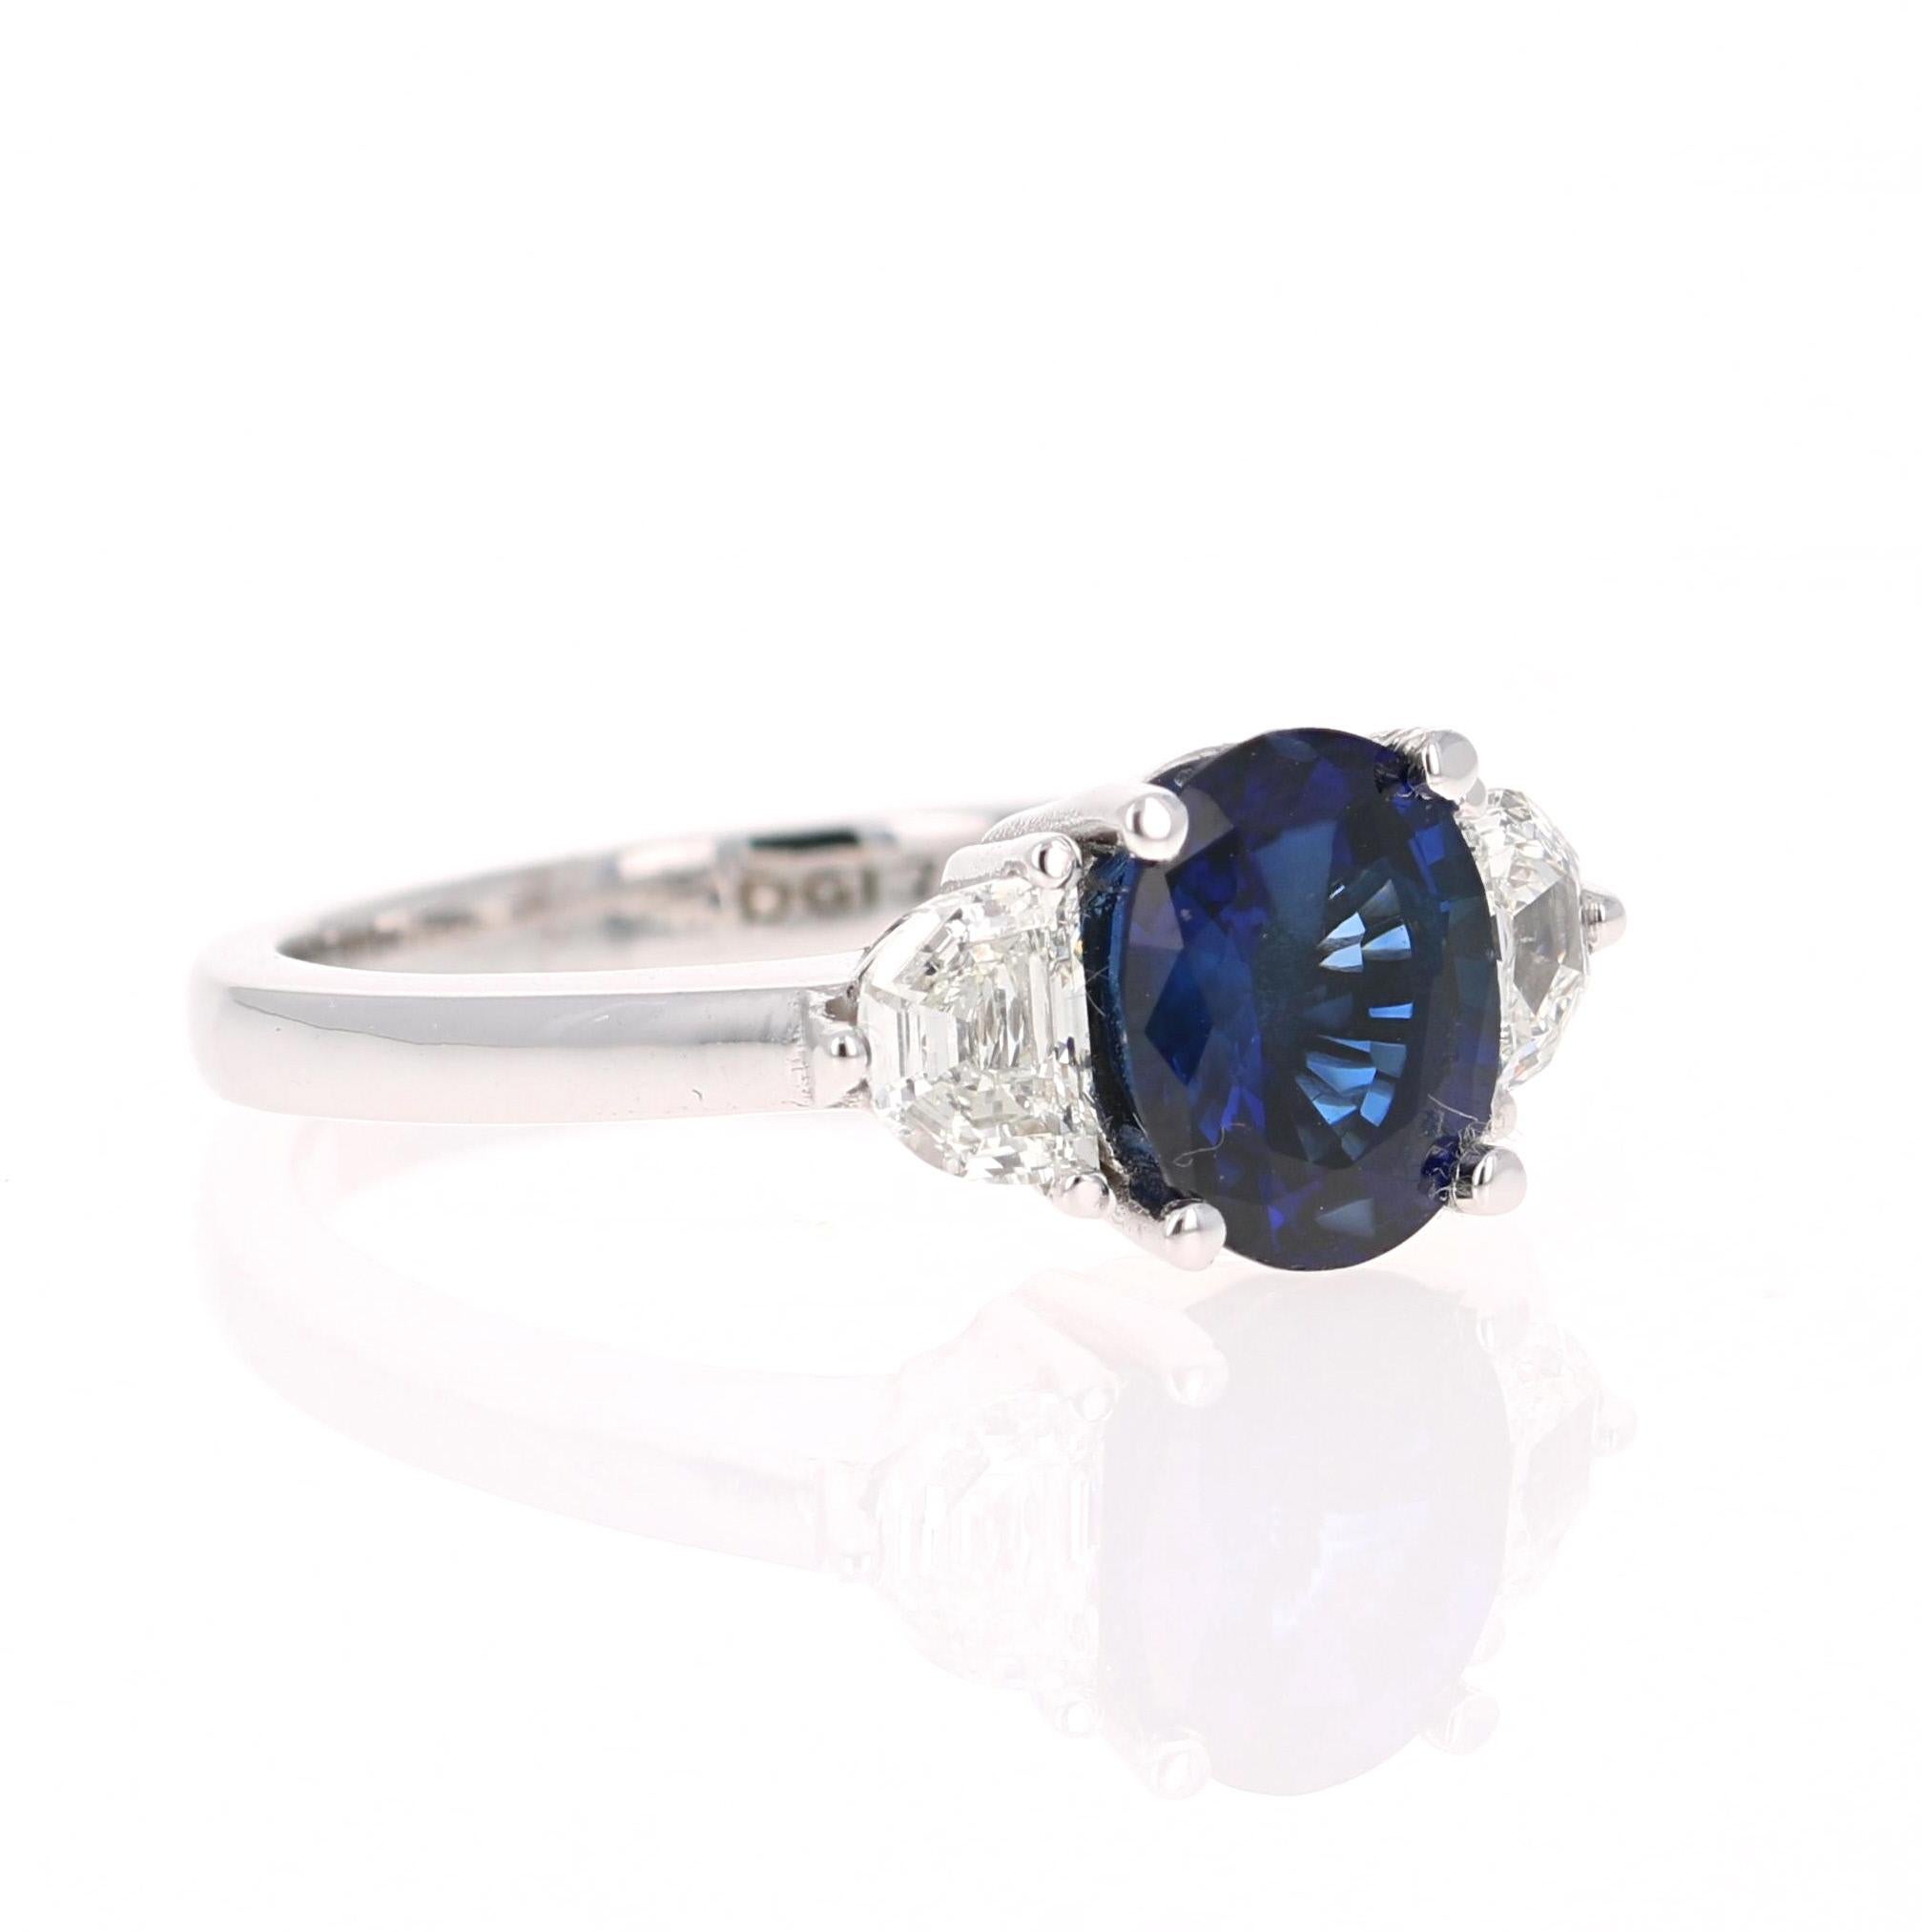 Beautiful Sapphire Diamond Three-Stone Ring - representing Past, Present and Future

This ring has a Blue Sapphire that weighs 2.00 Carats and is GIA Certified. The Sapphire is a natural Blue Oval Cut with Heat. The GIA Certificate Number is: